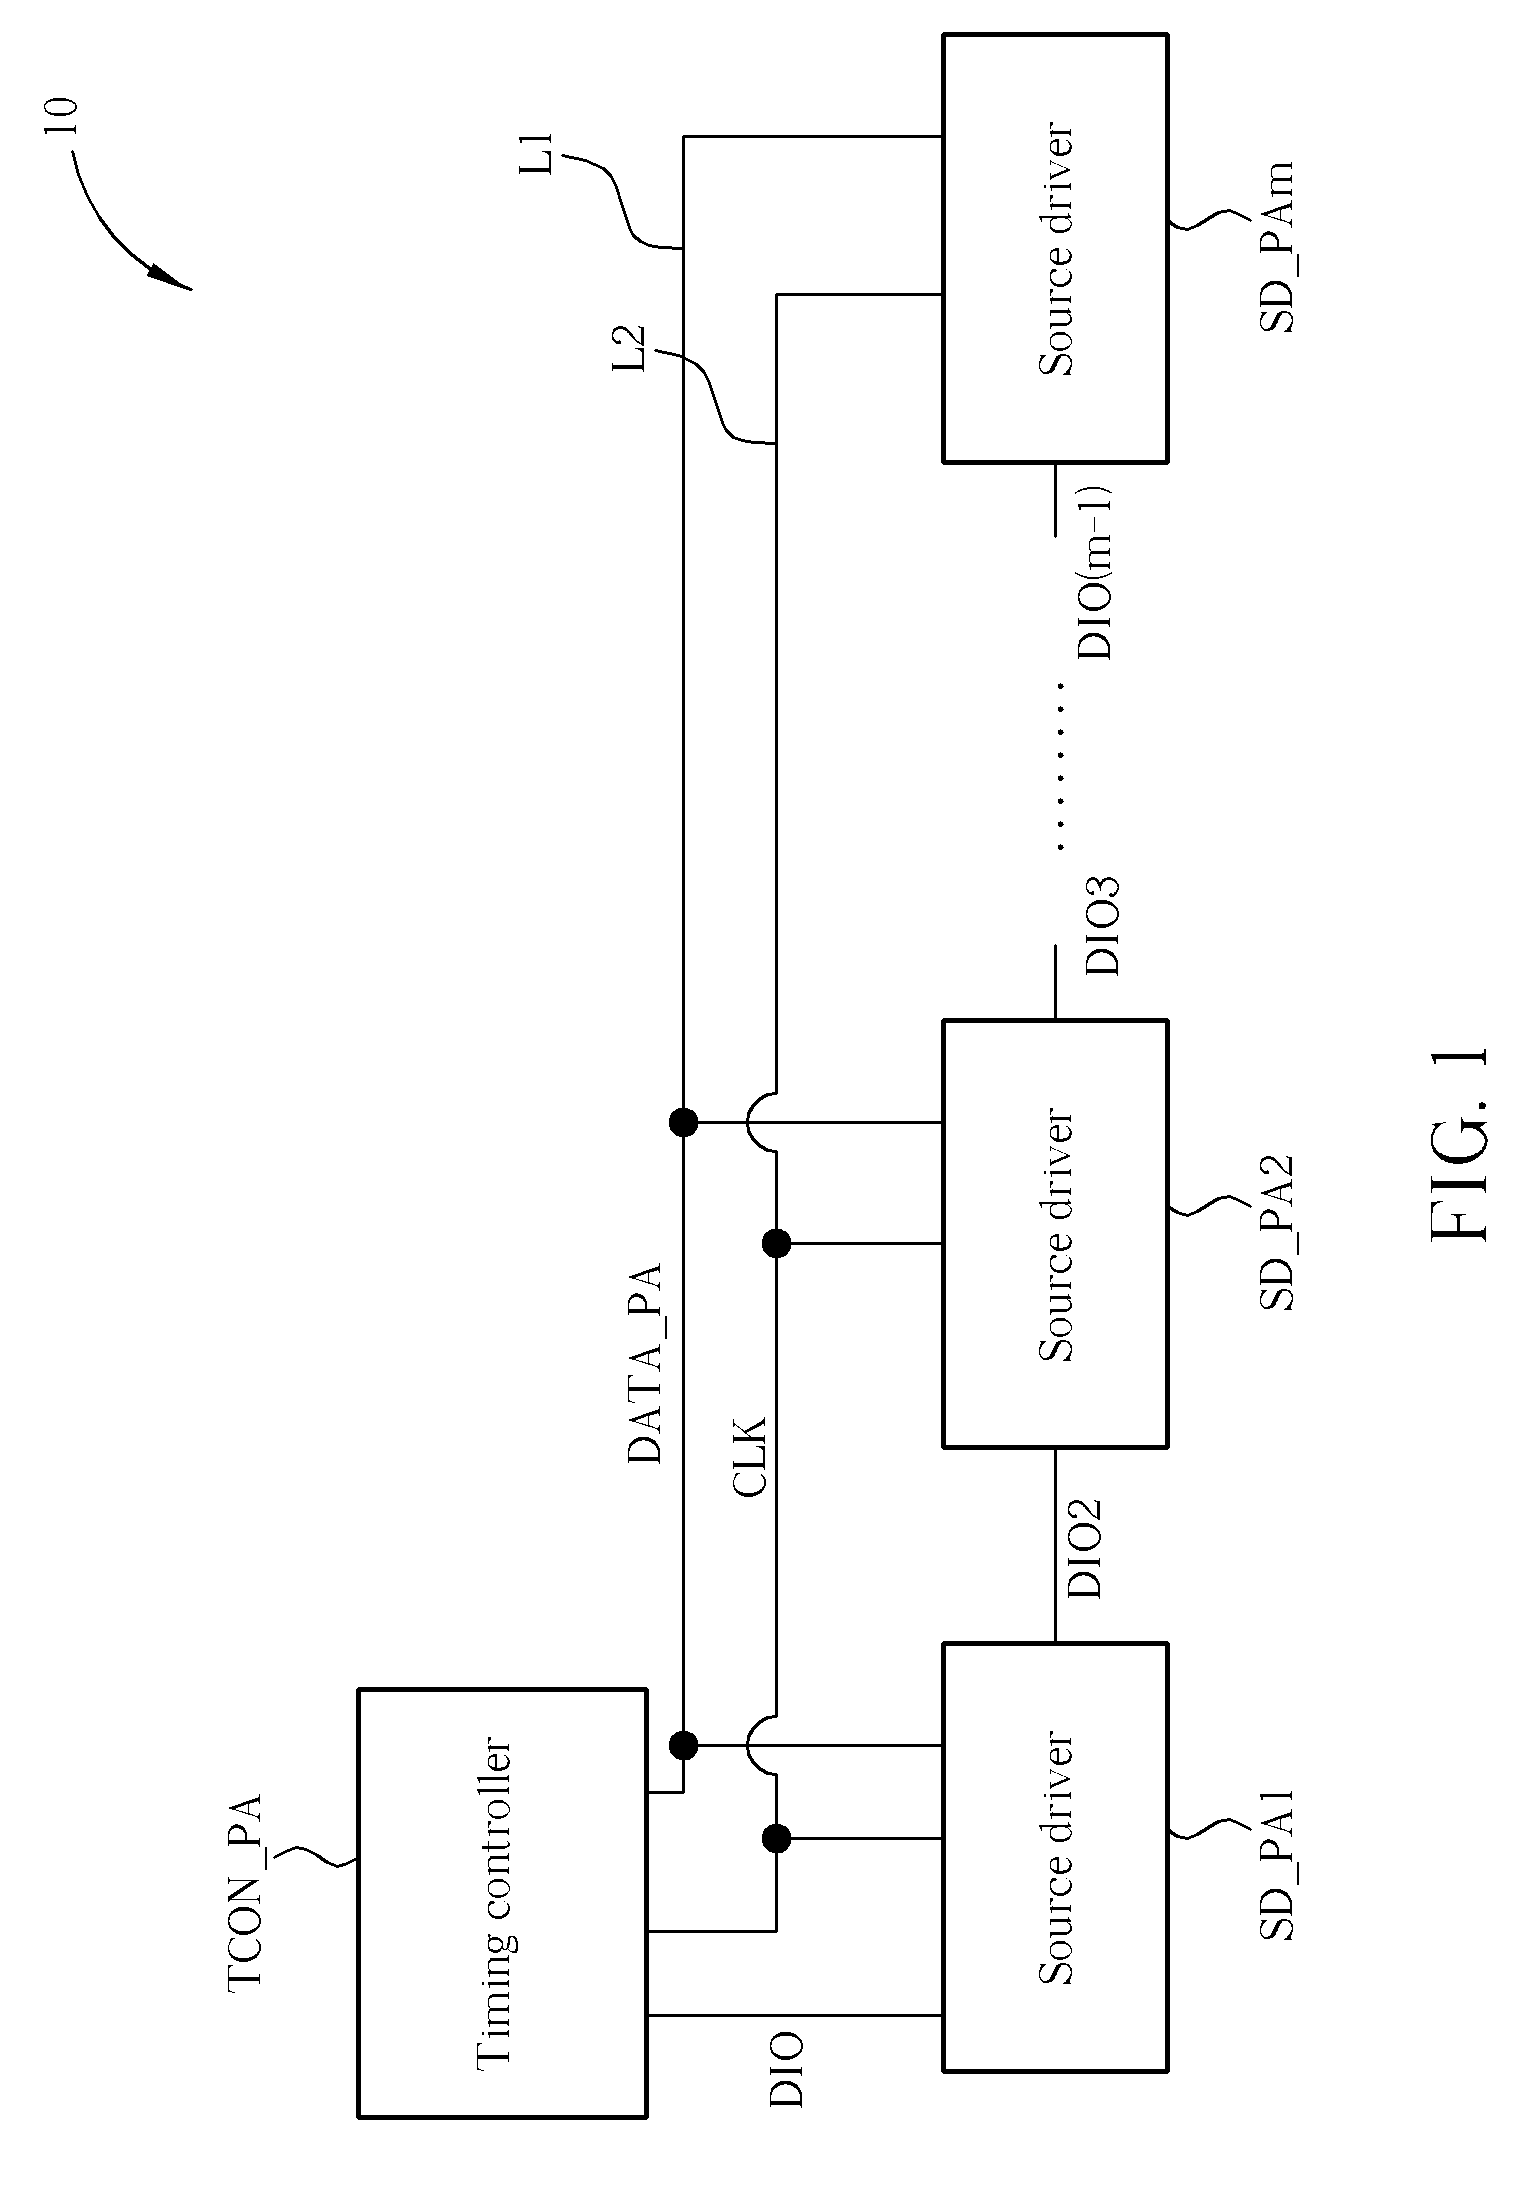 Differential signal interfacing device and related method